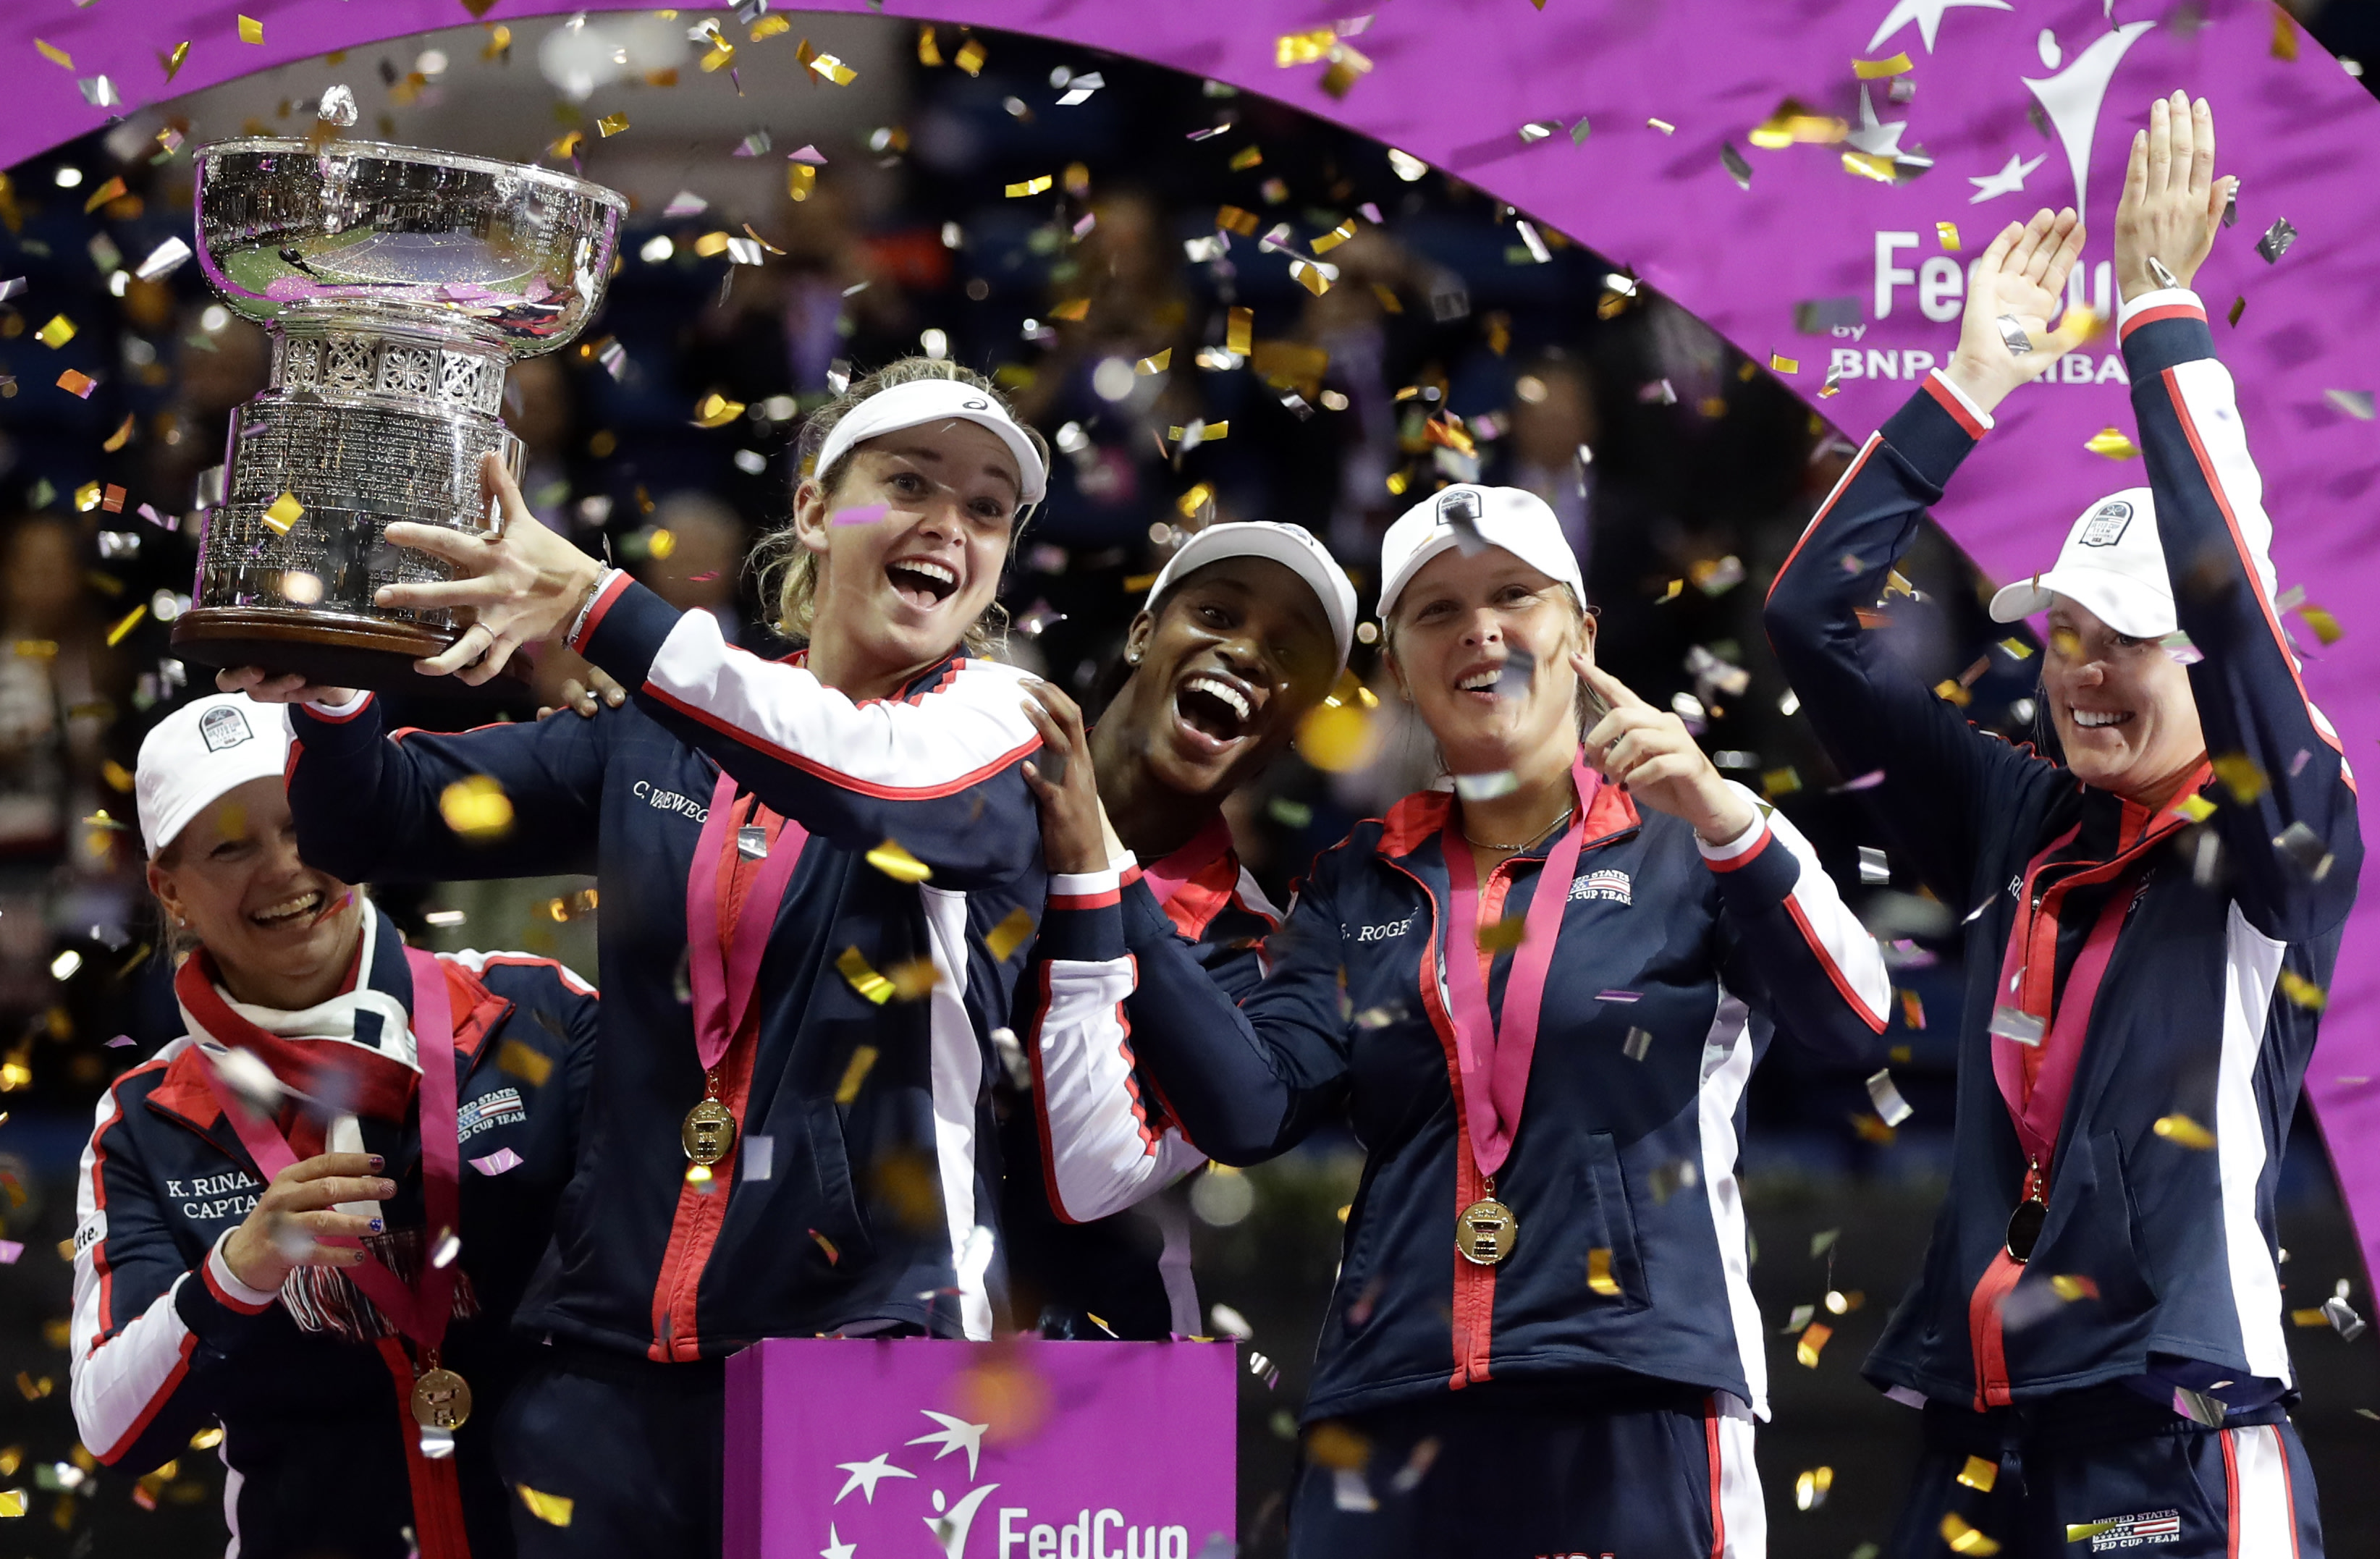 Fed Cup Weekend 10 Things To Know